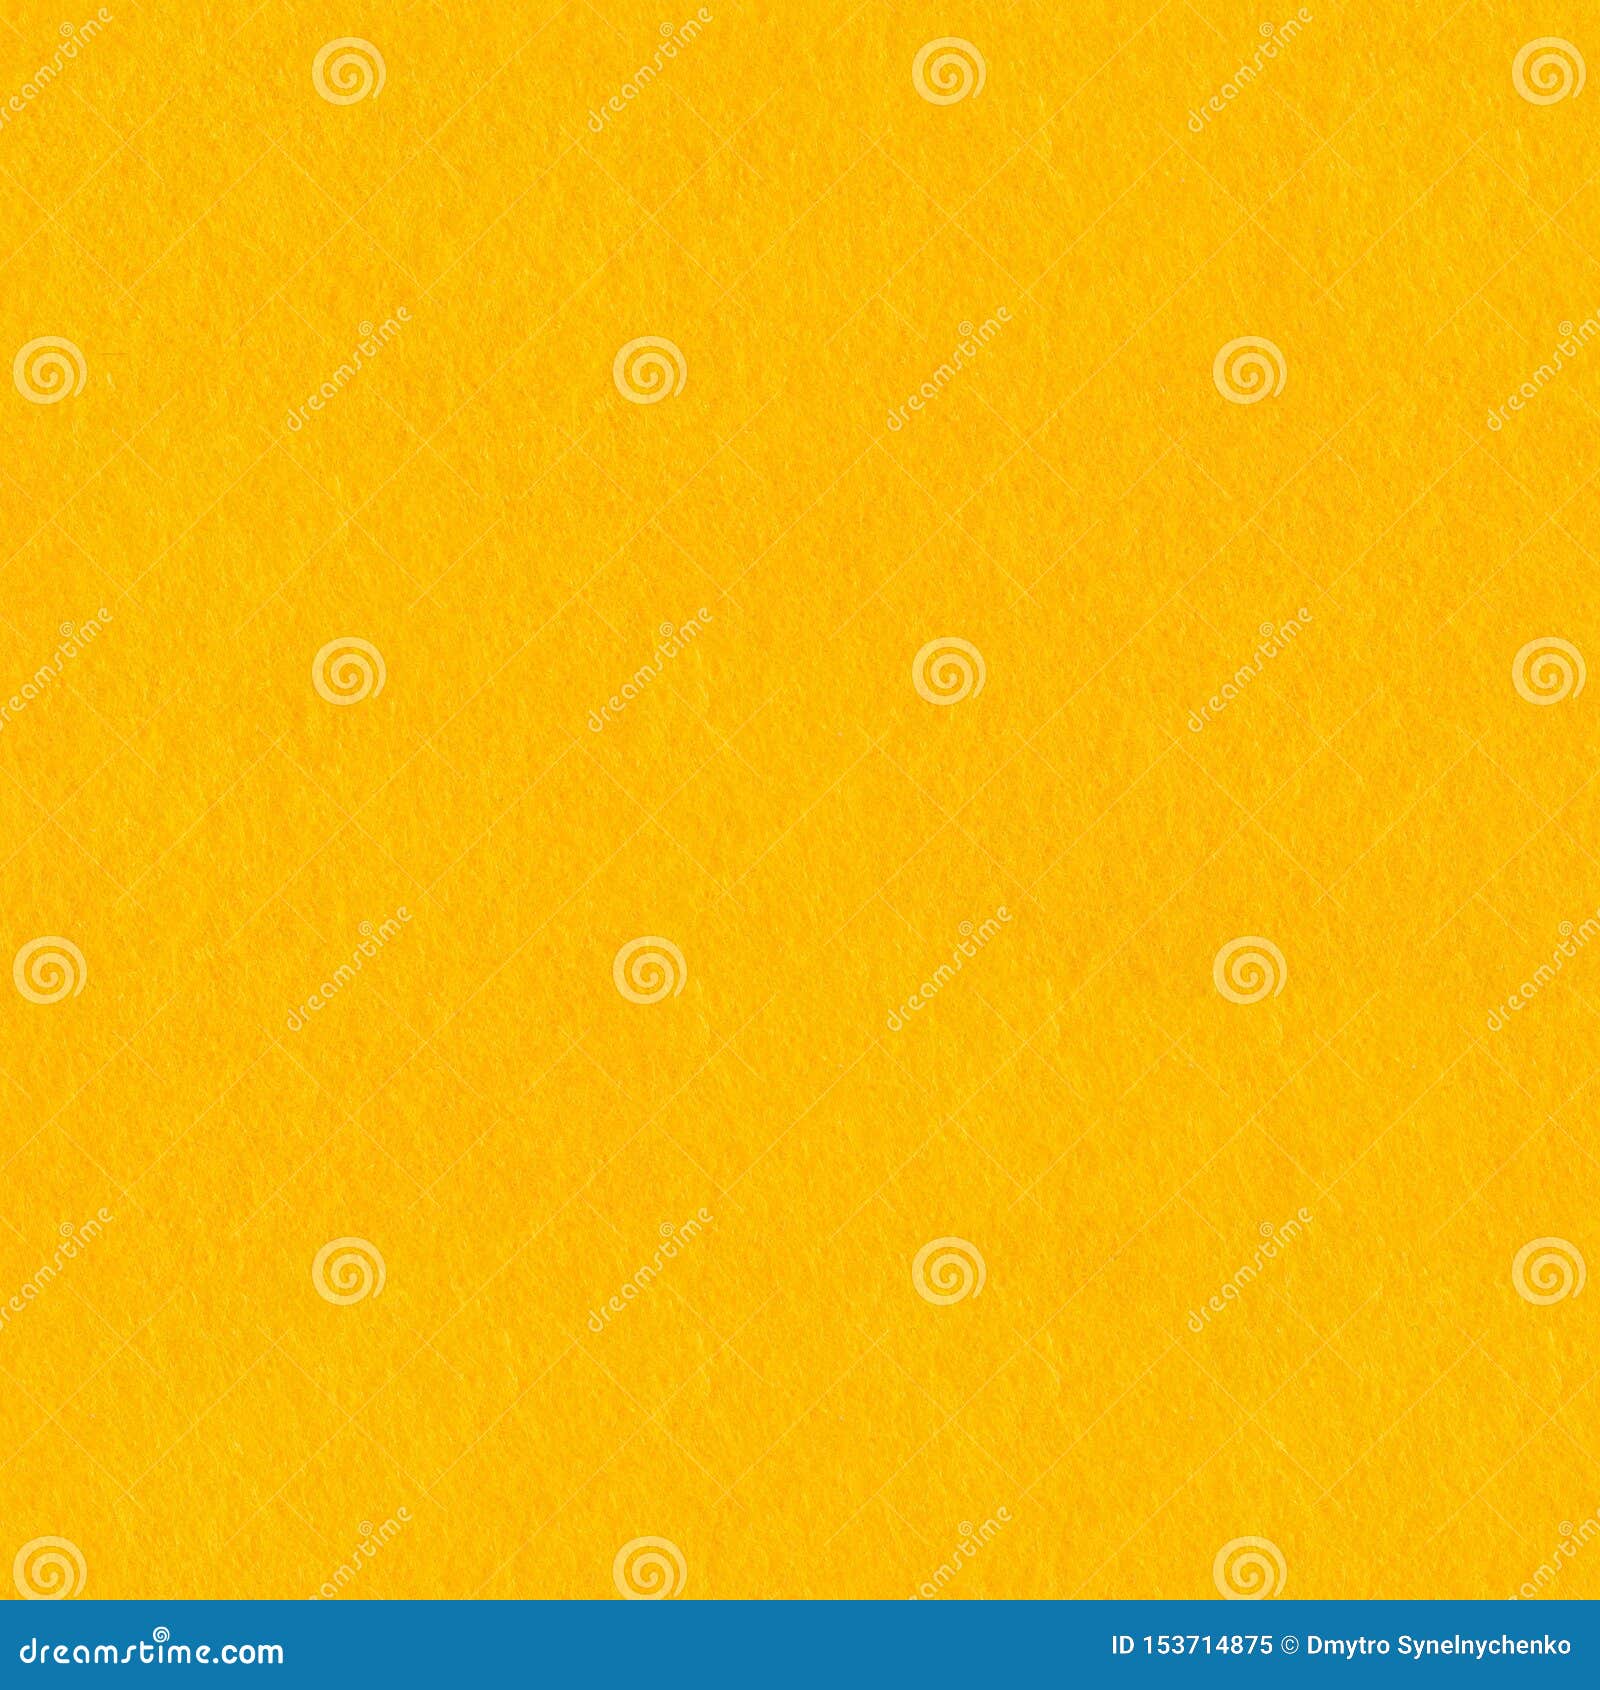 Yellow Felt Background Surface Abstract Fabric Stock Photo 1198217104